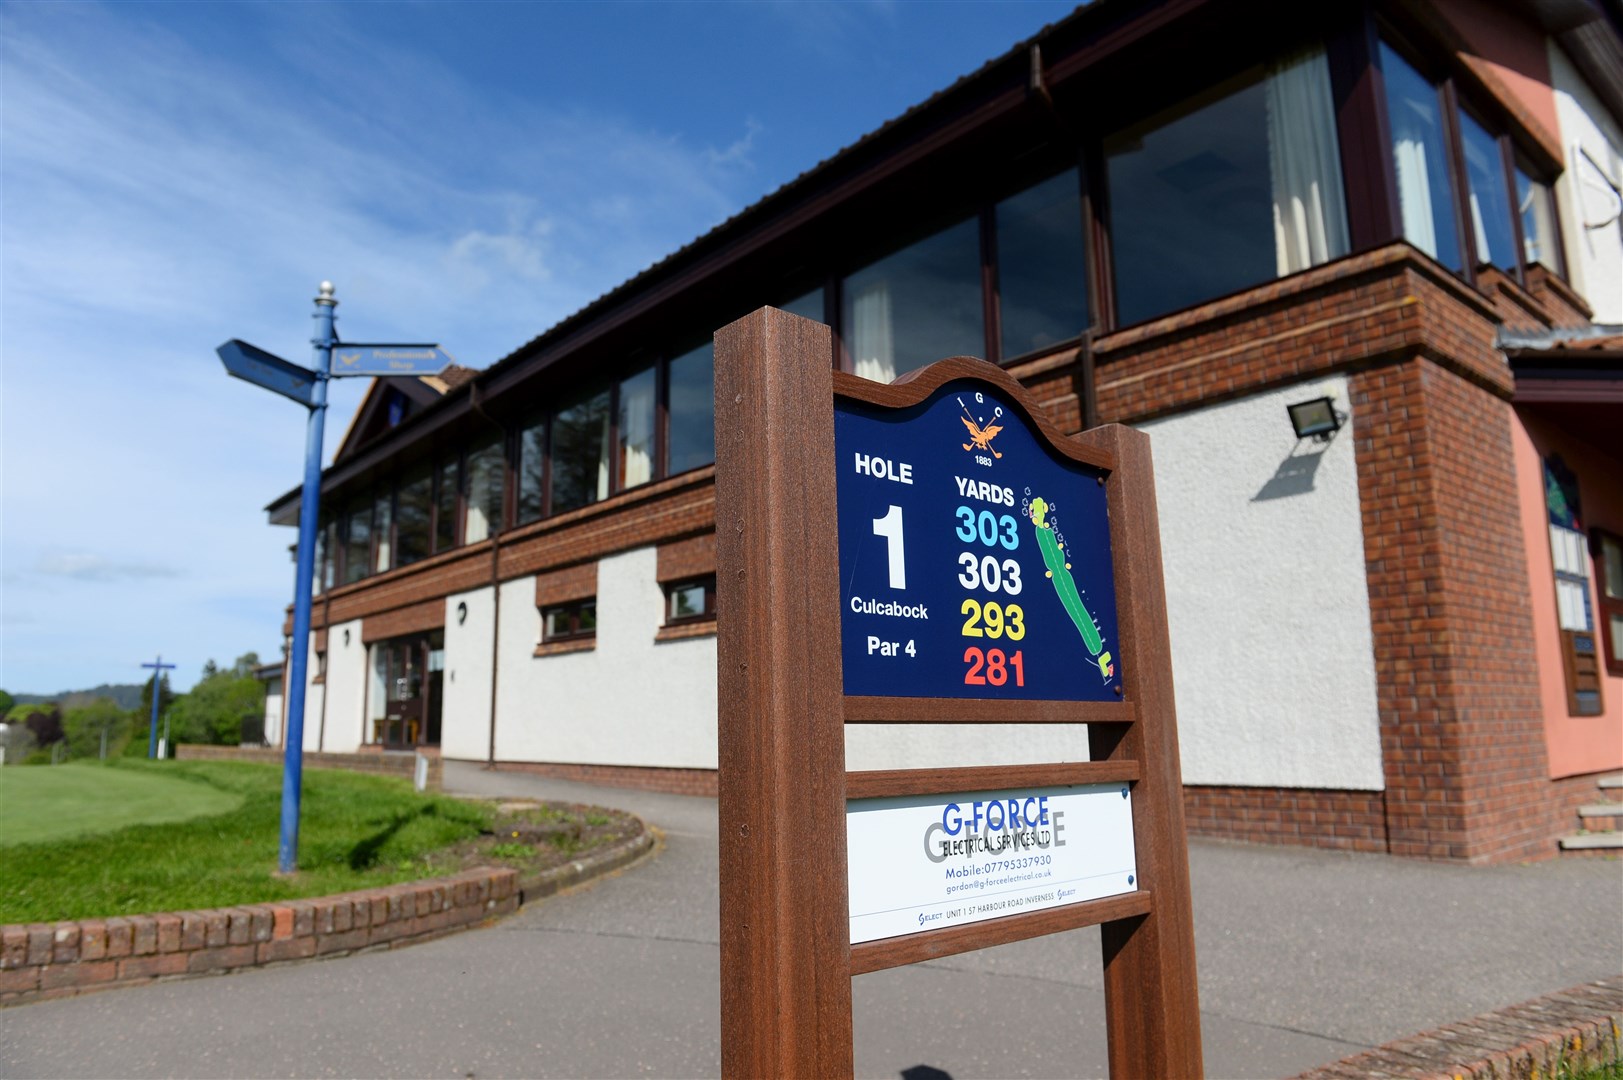 Inverness Golf Club clubhouse.